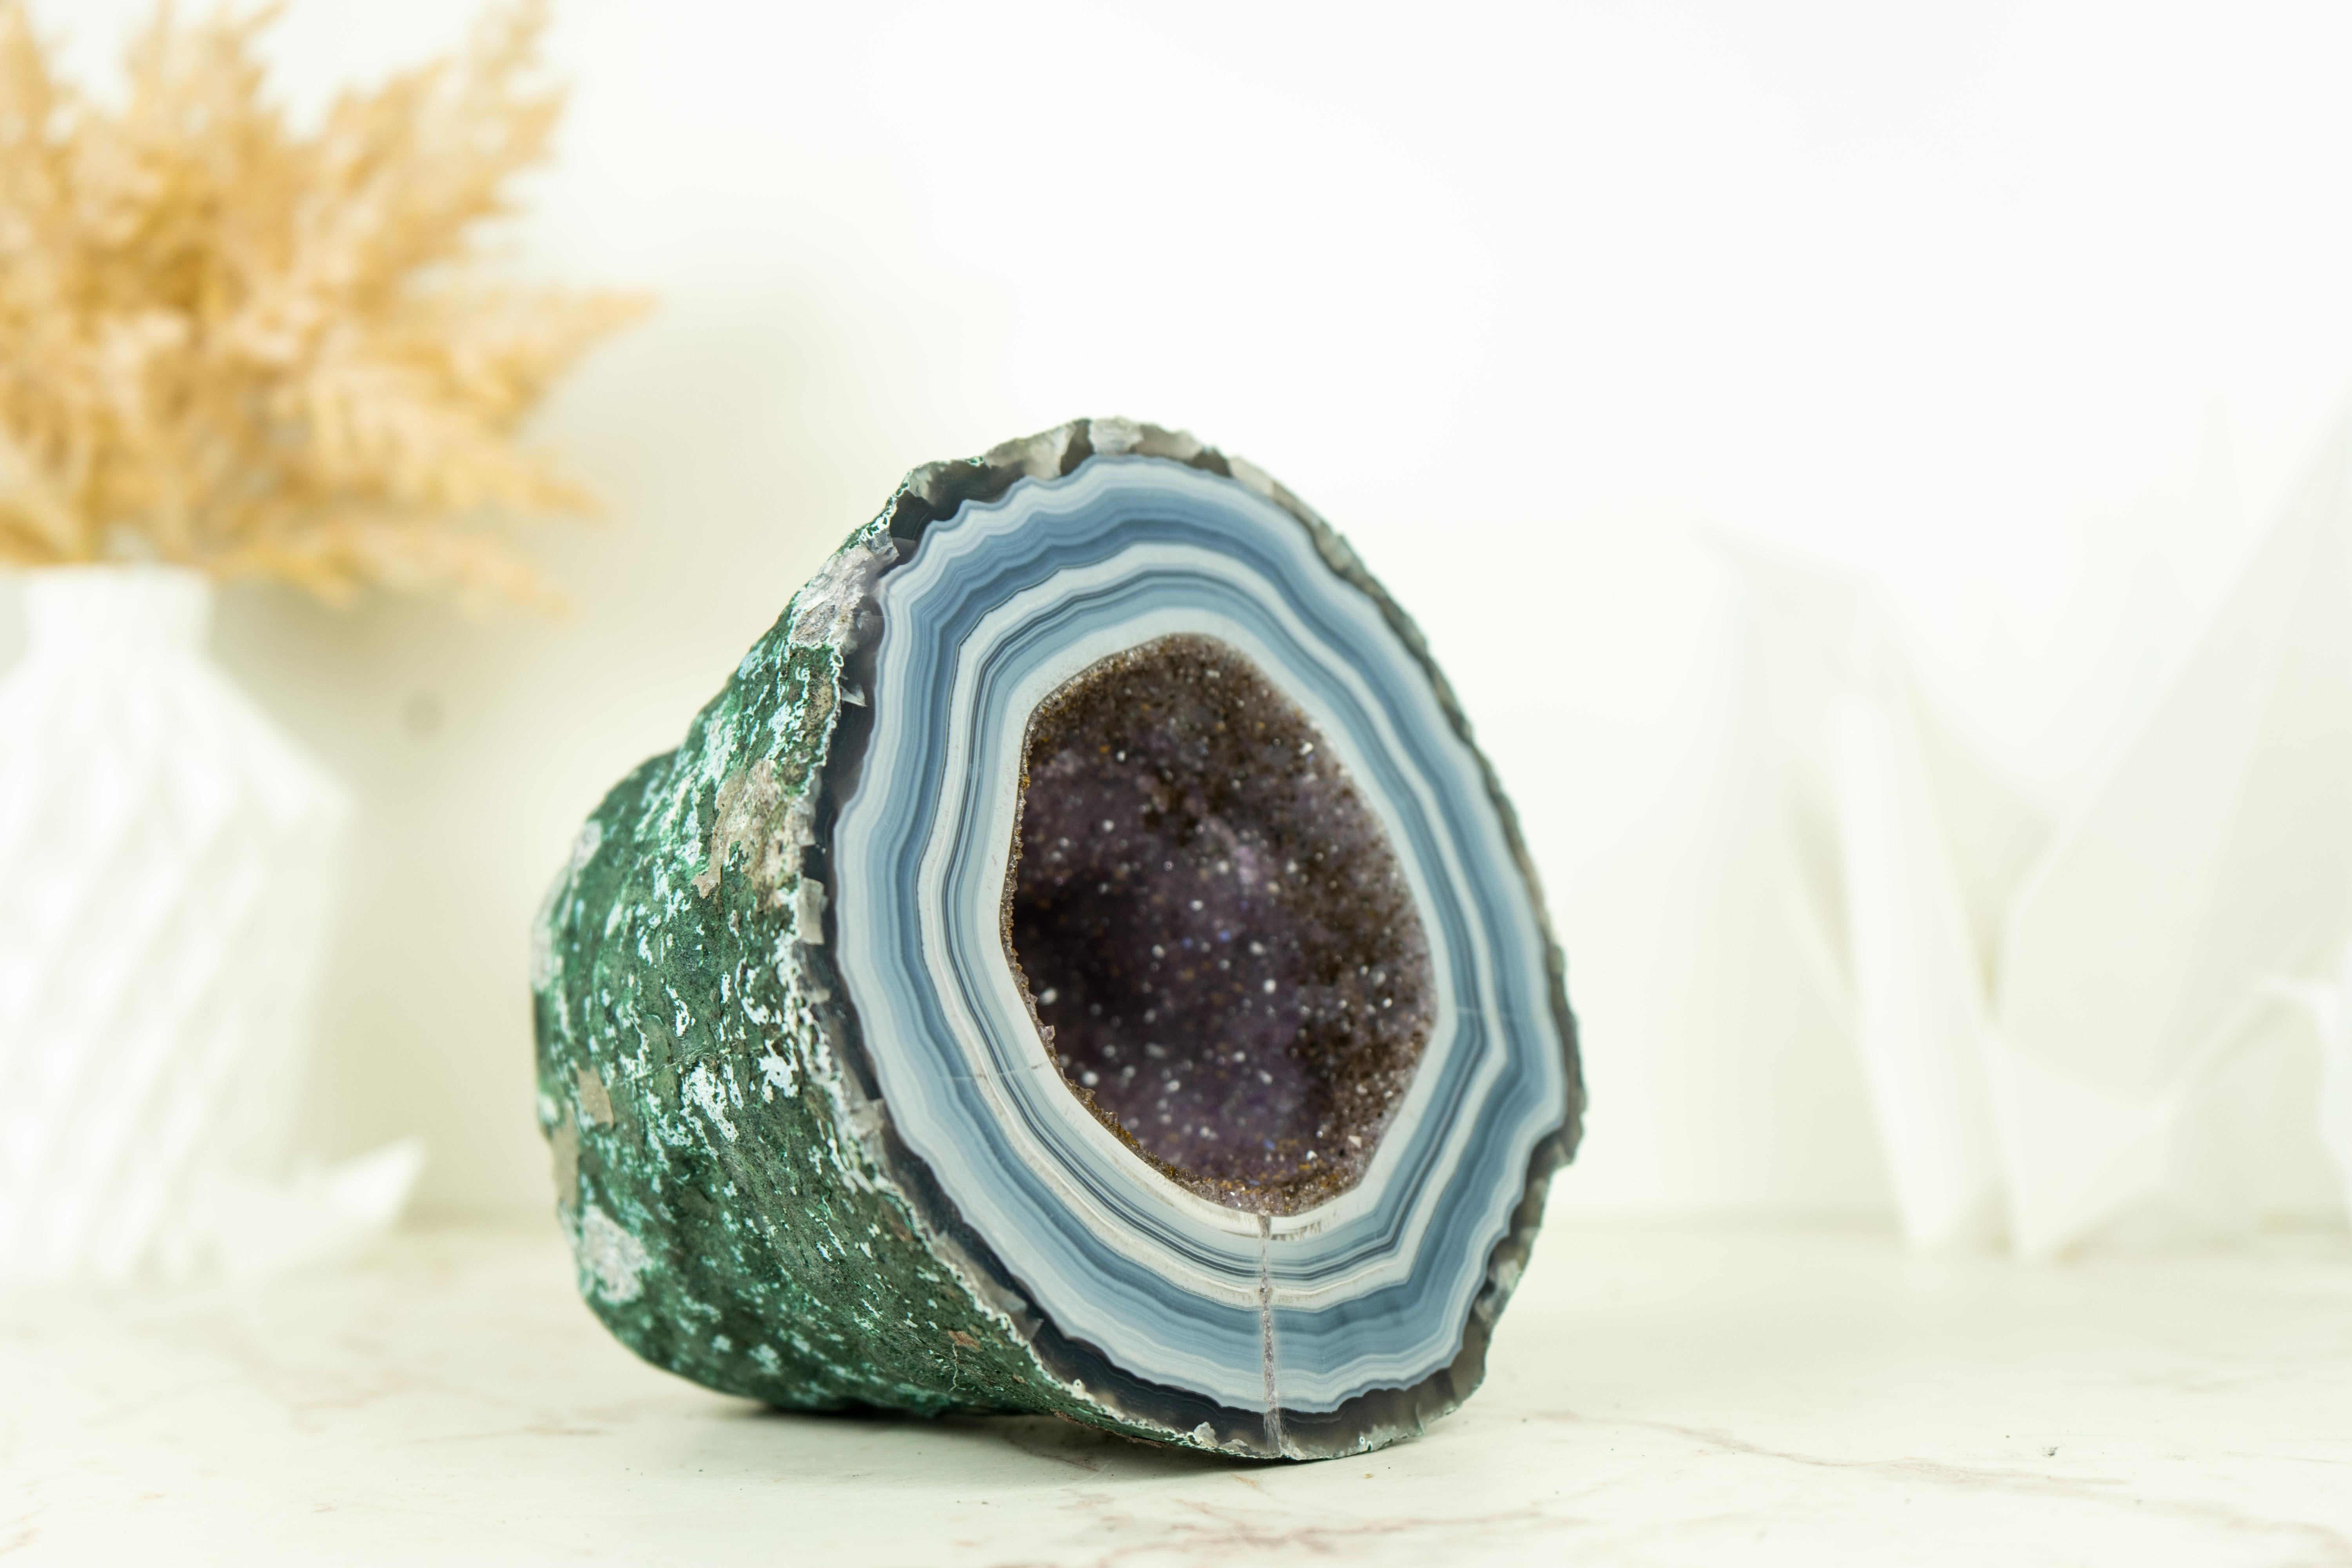 Brazilian Small Agate Geode with World-Class Blue Banded Agate and Galaxy Druzy